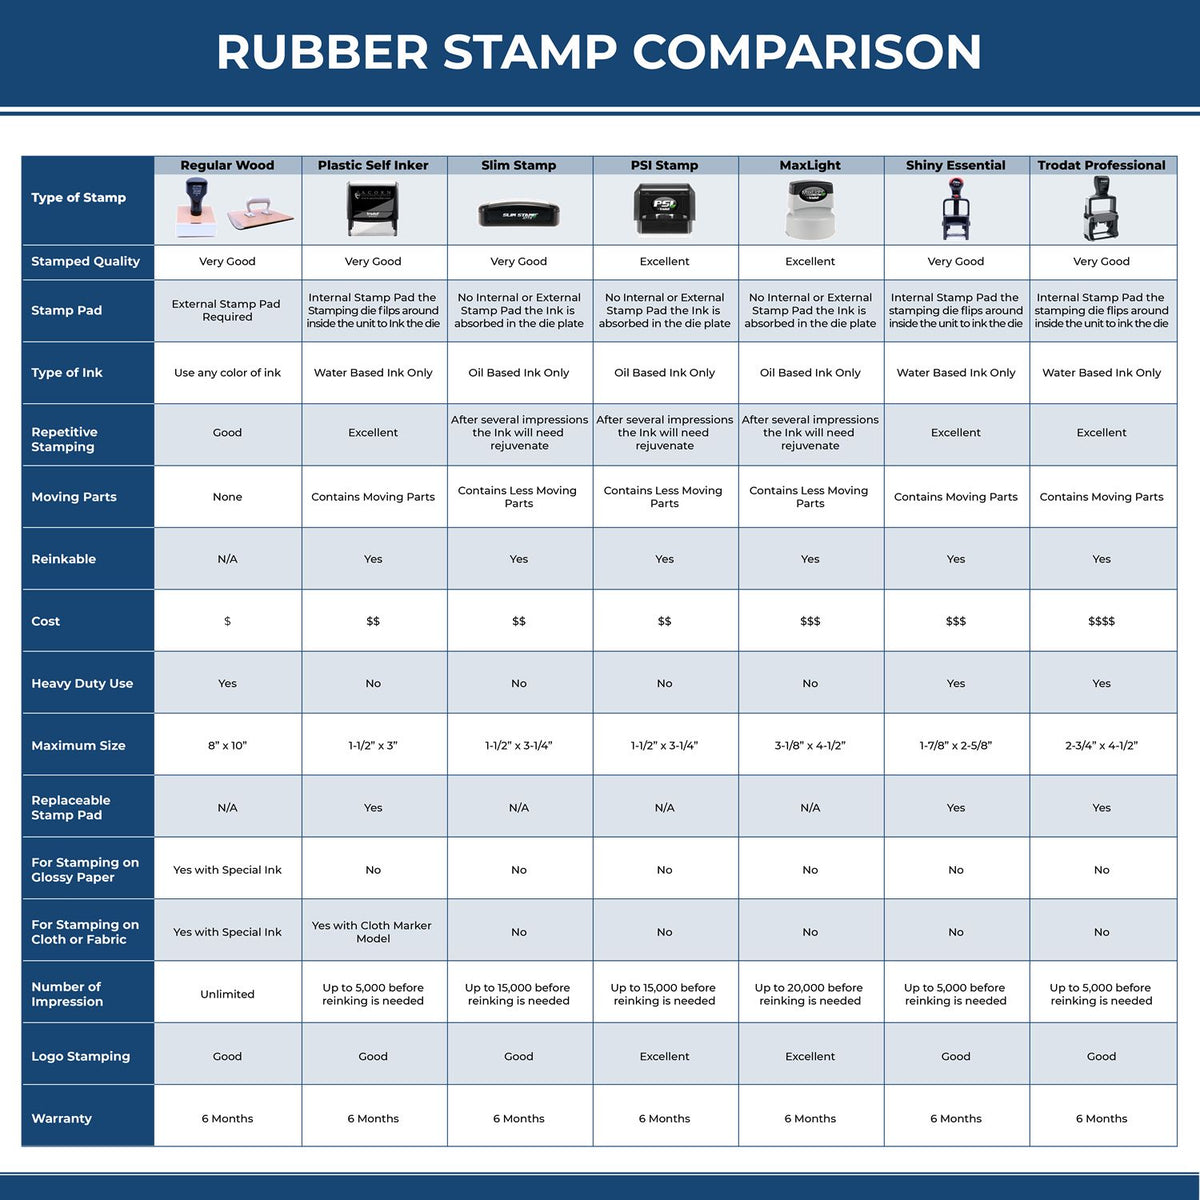 Large Refused Rubber Stamp 4967R Rubber Stamp Comparison